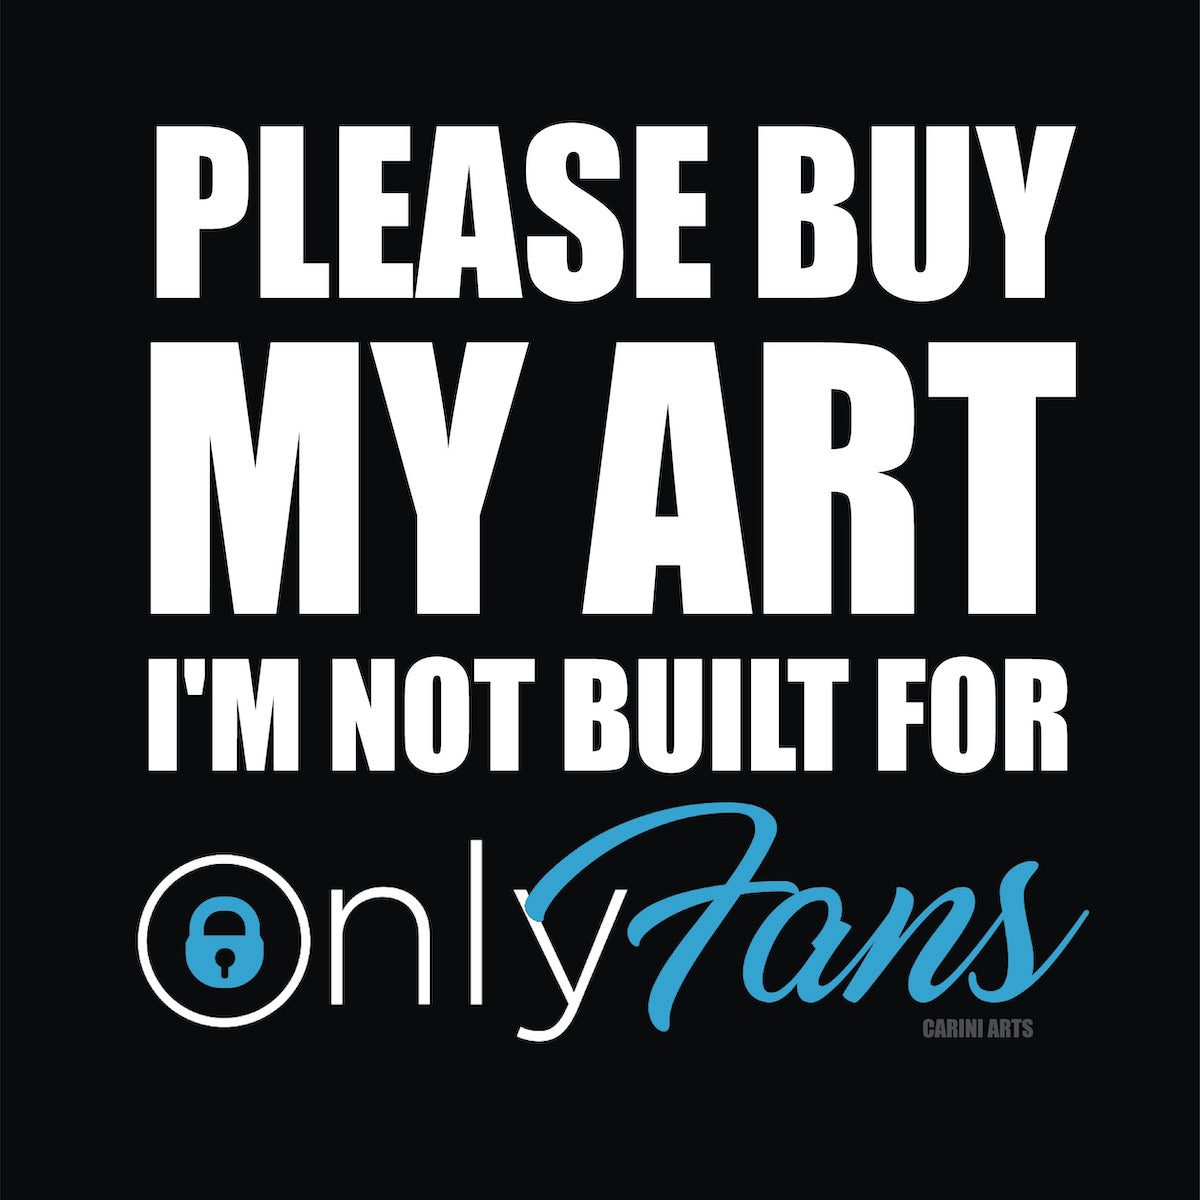 OnlyFans for artists quote 